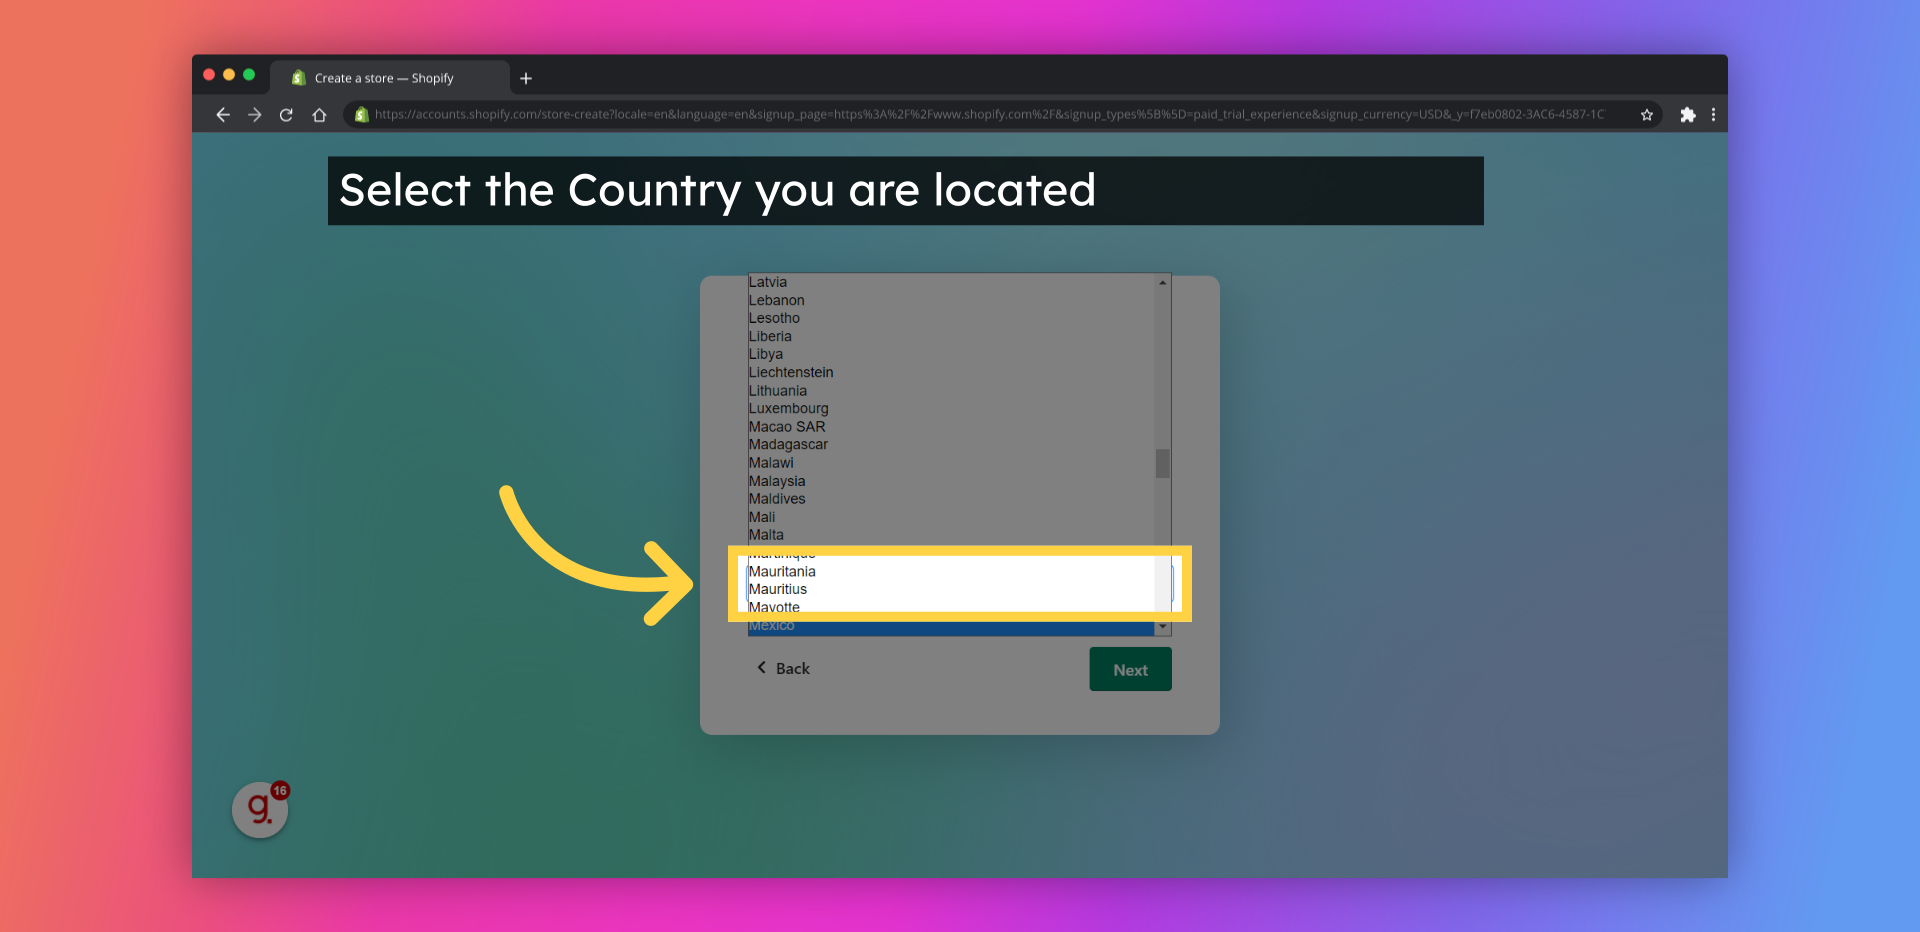 Select the Country you are located